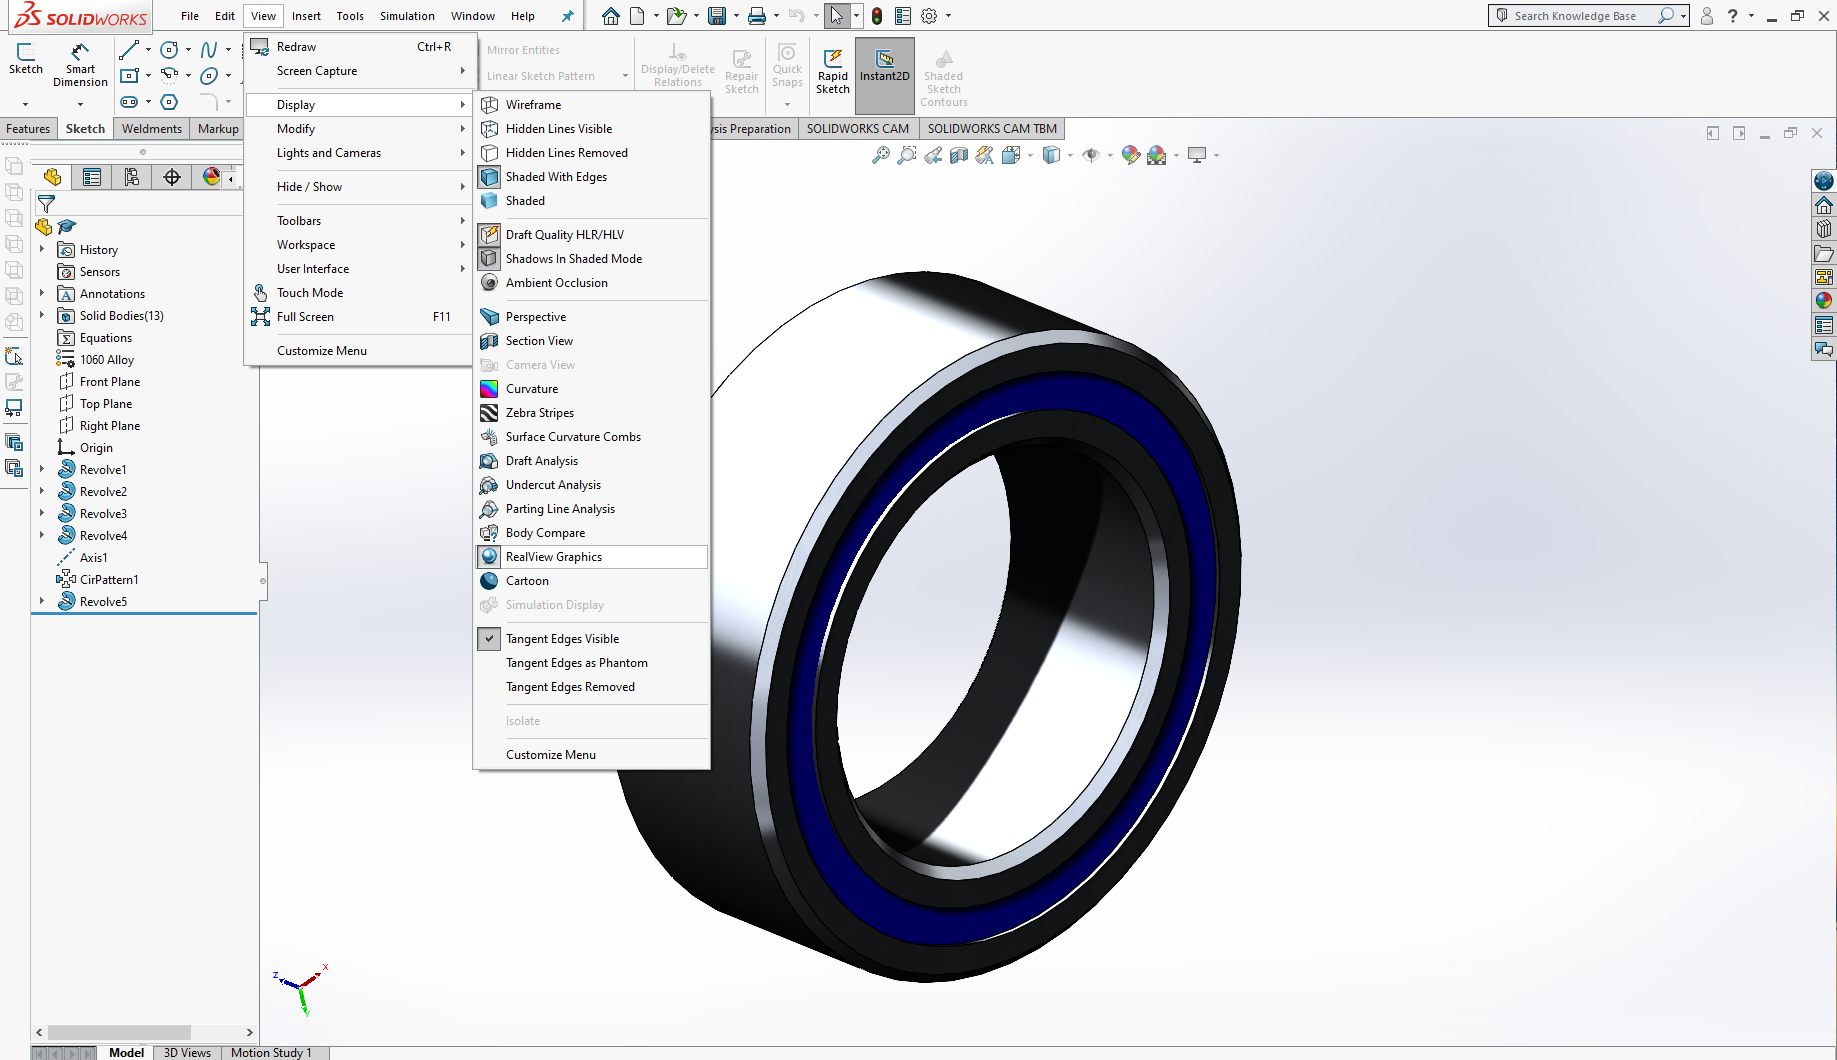 download realview graphics solidworks